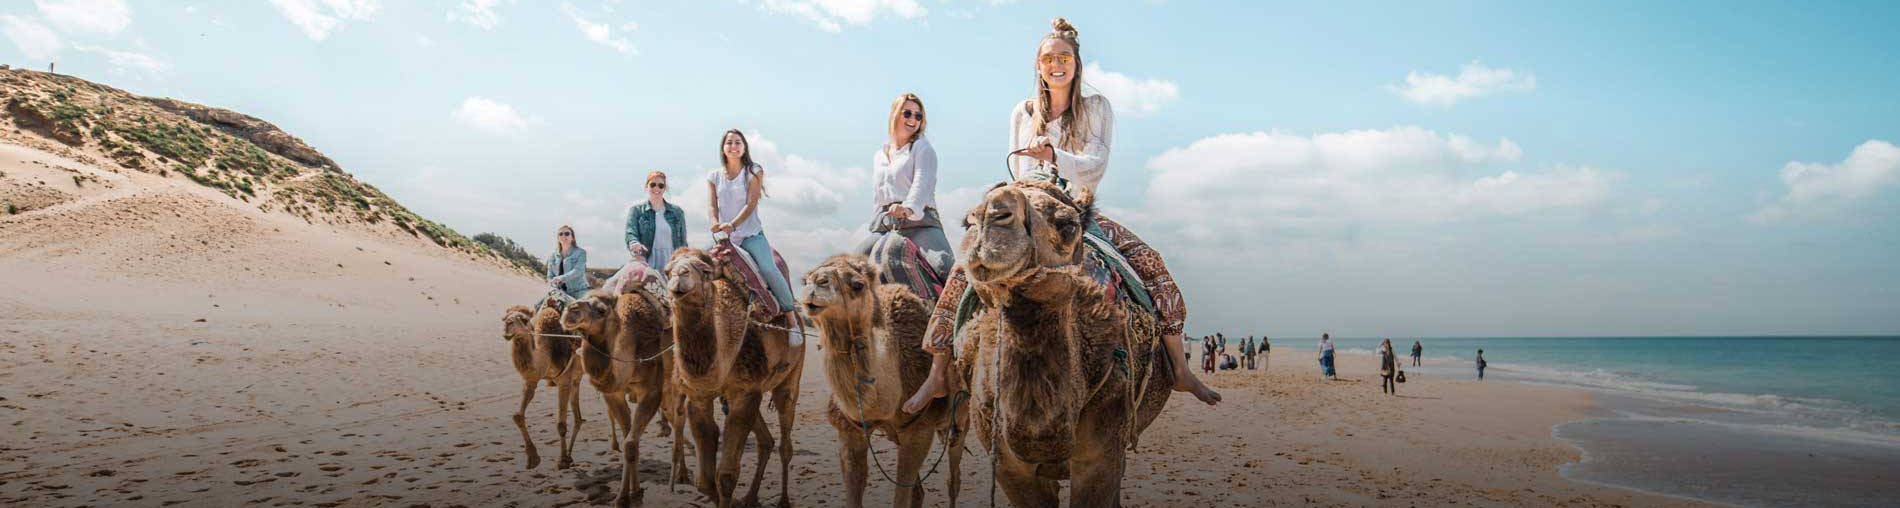 Morocco Tour Package From India